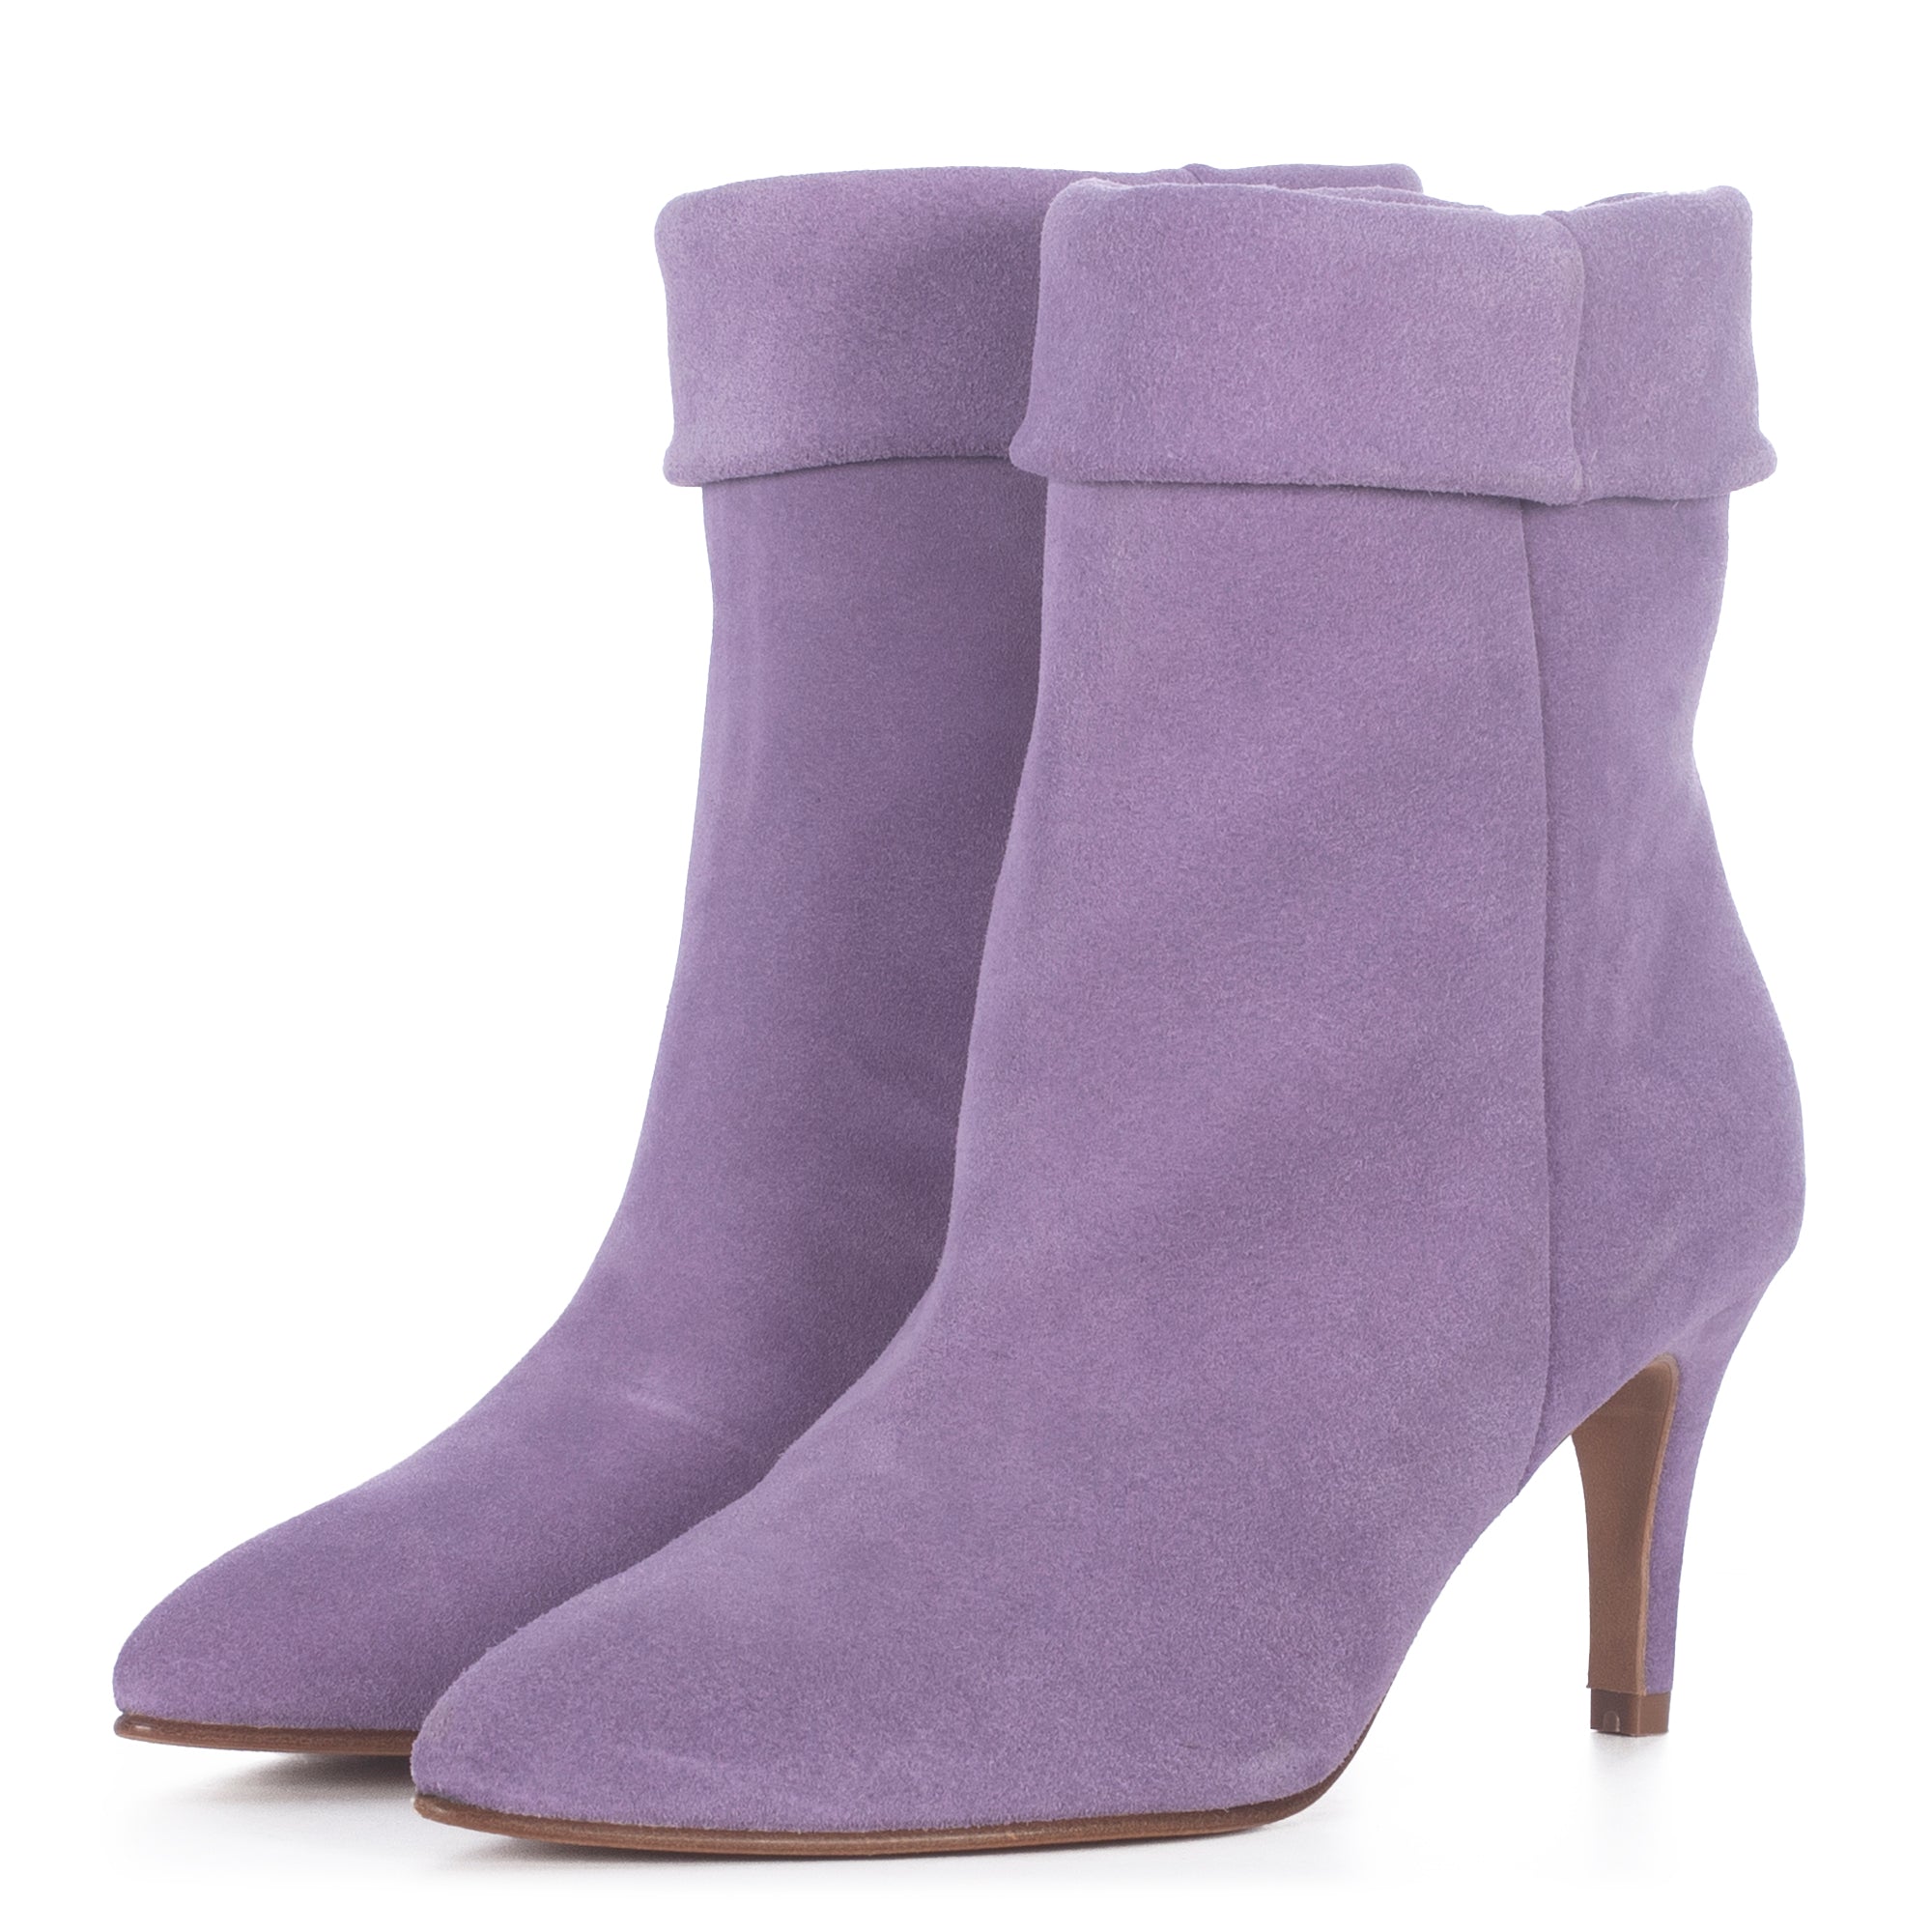 PURPLE SUEDE ANKLE BOOTS